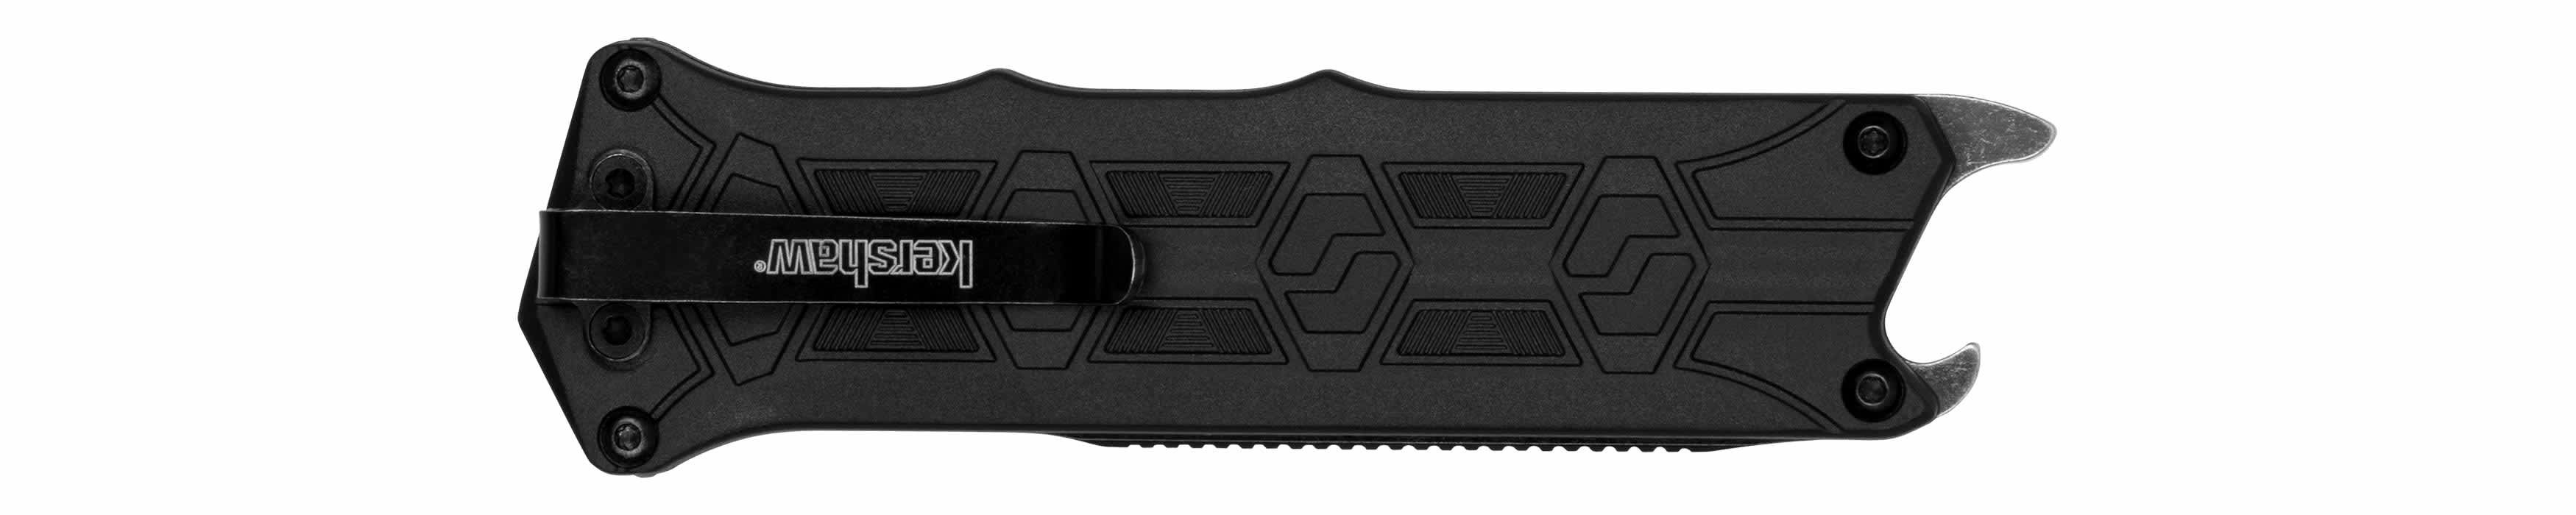 Kershaw® 1195 Intersteller Black Manual Out-The-Front Knife